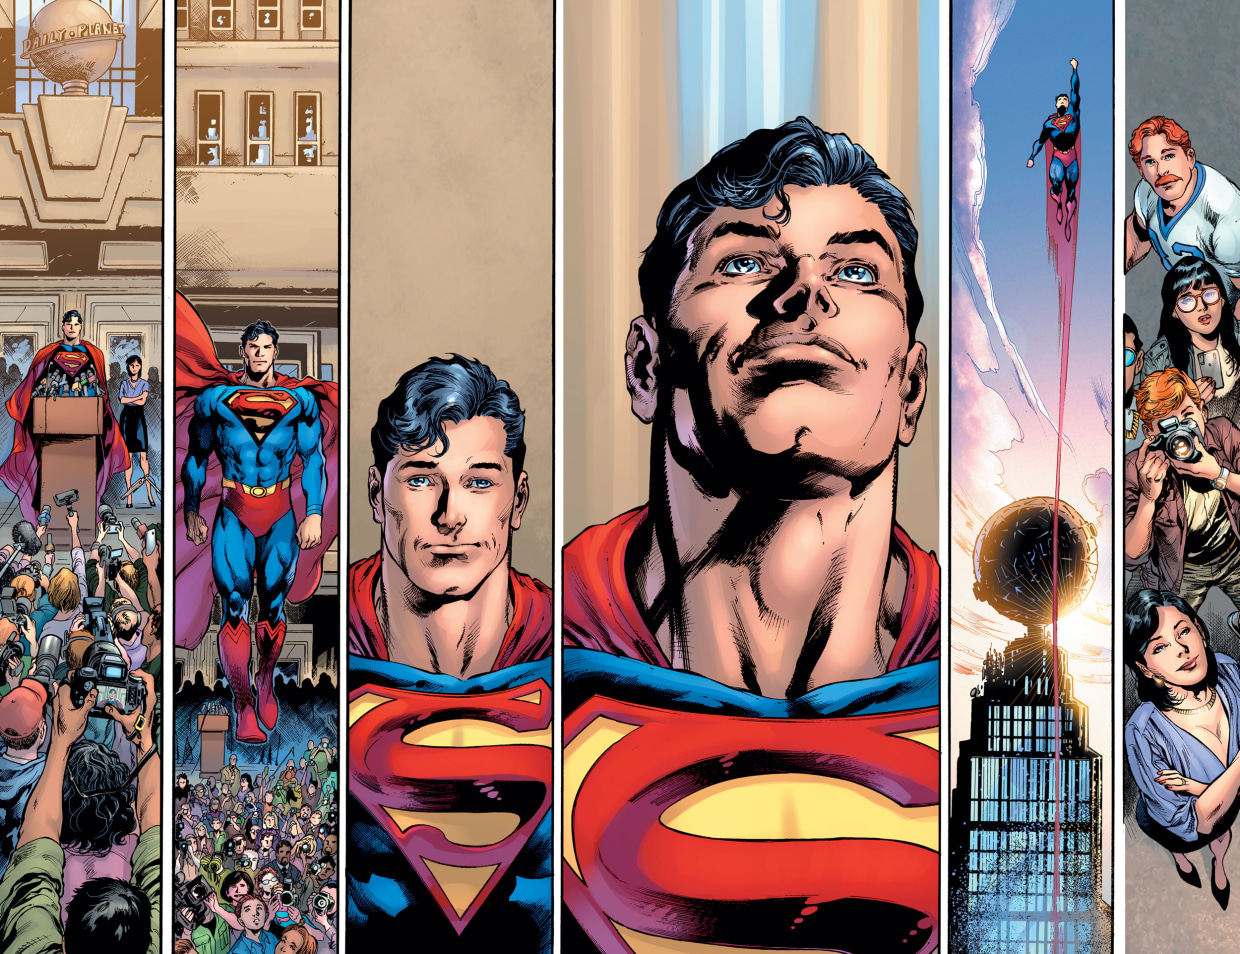 100 Things Superman Fans Should Know & Do Before They Die